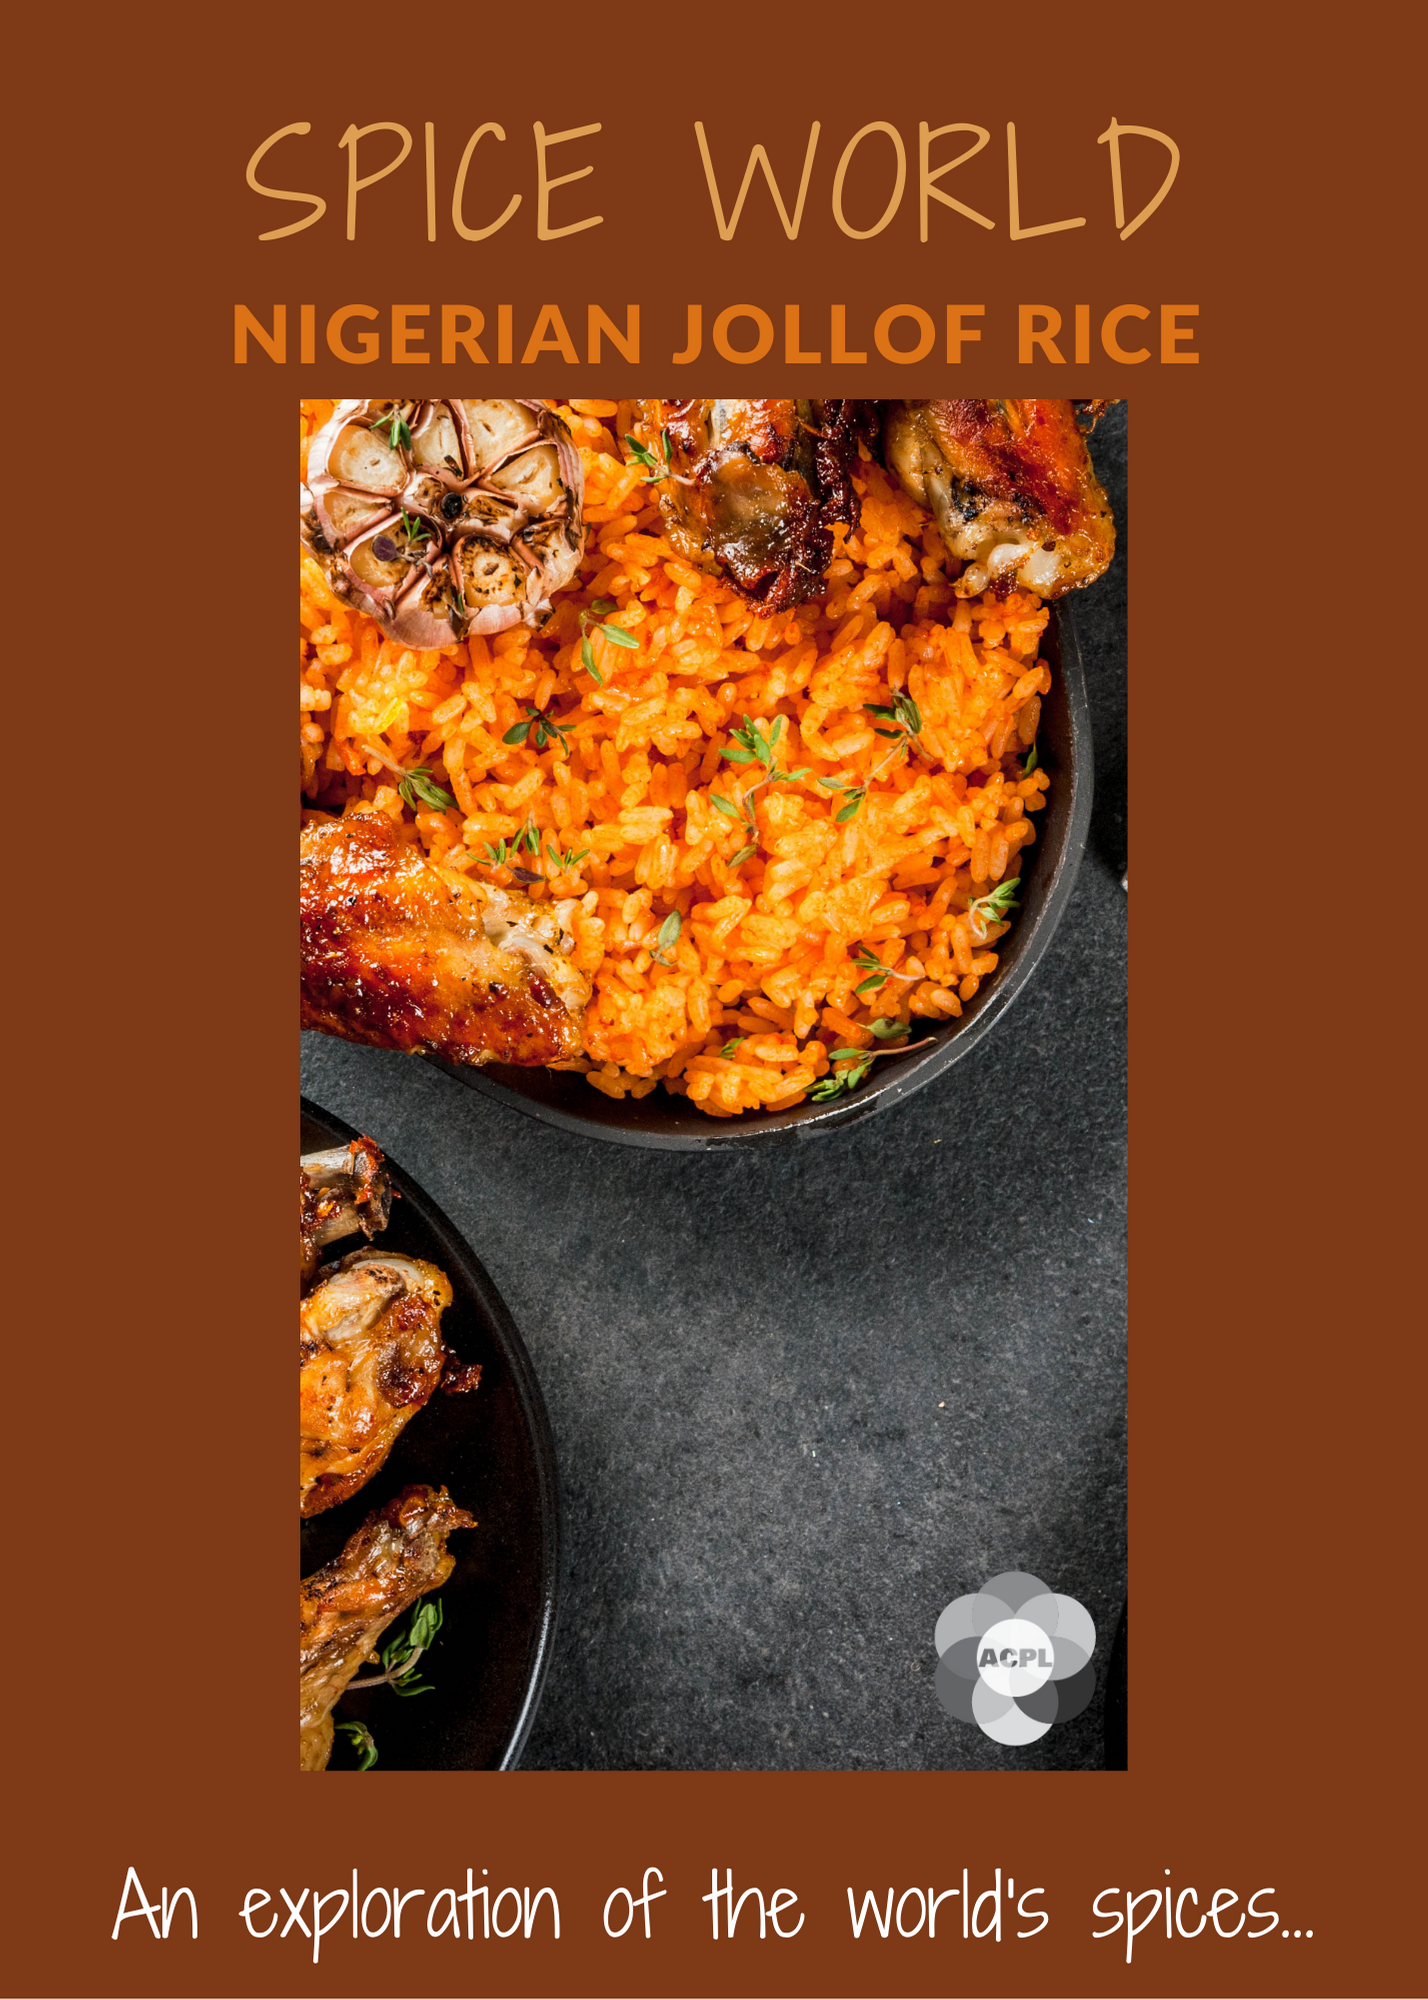 An image of jollof rice with meat on a brown background. Text reads Spice World: Nigeran Jollof Rice. Text at bottom reads An exploration of the world's spices